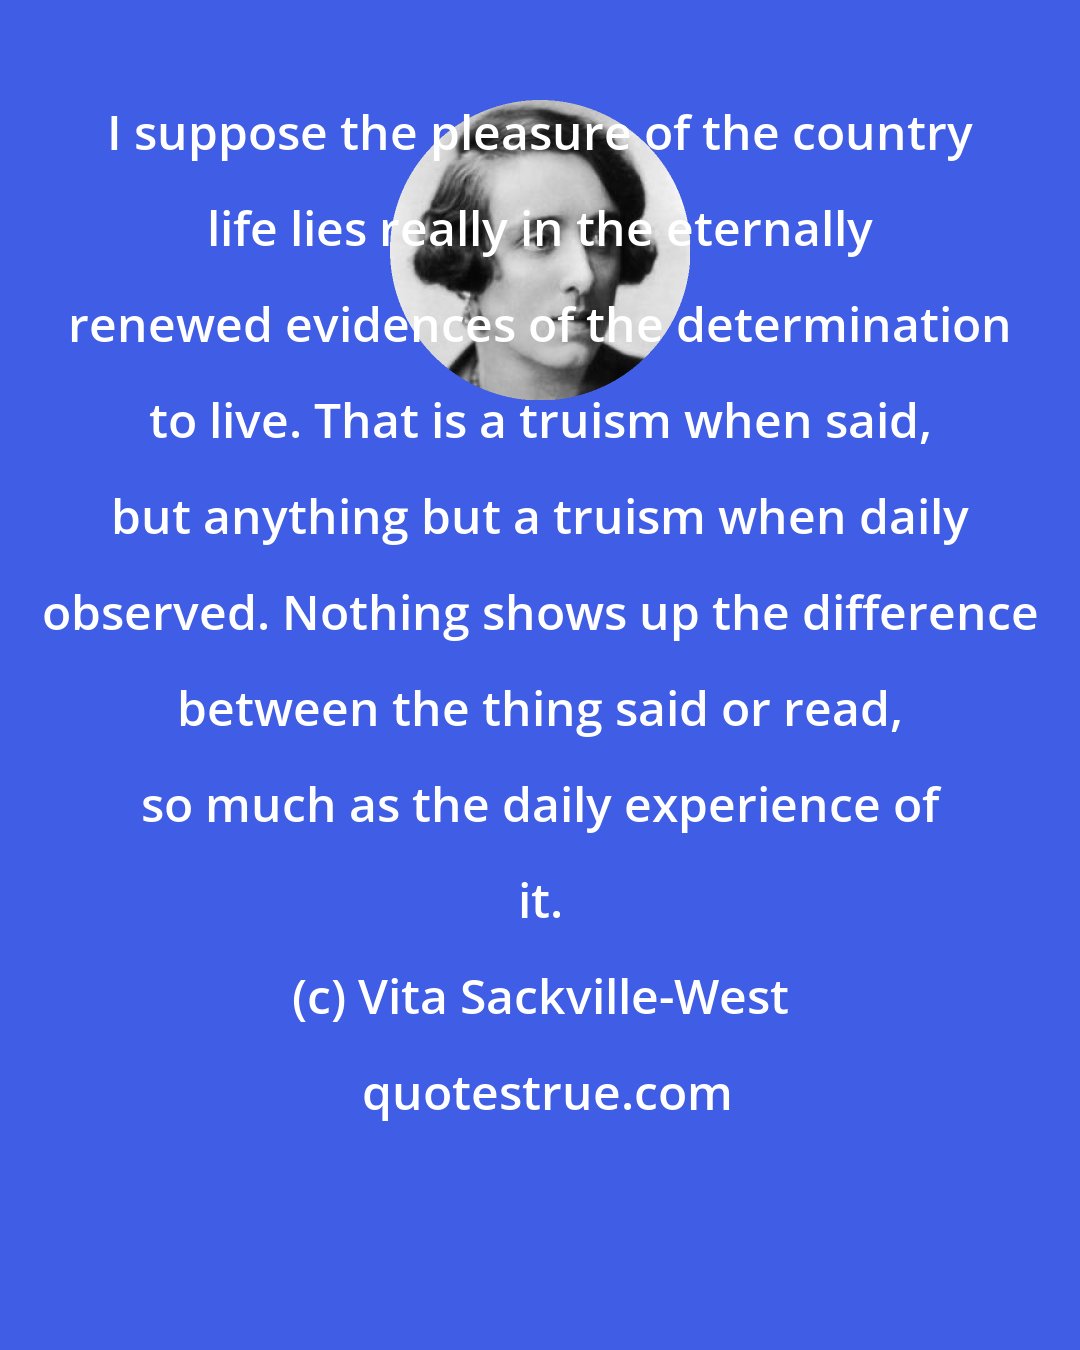 Vita Sackville-West: I suppose the pleasure of the country life lies really in the eternally renewed evidences of the determination to live. That is a truism when said, but anything but a truism when daily observed. Nothing shows up the difference between the thing said or read, so much as the daily experience of it.